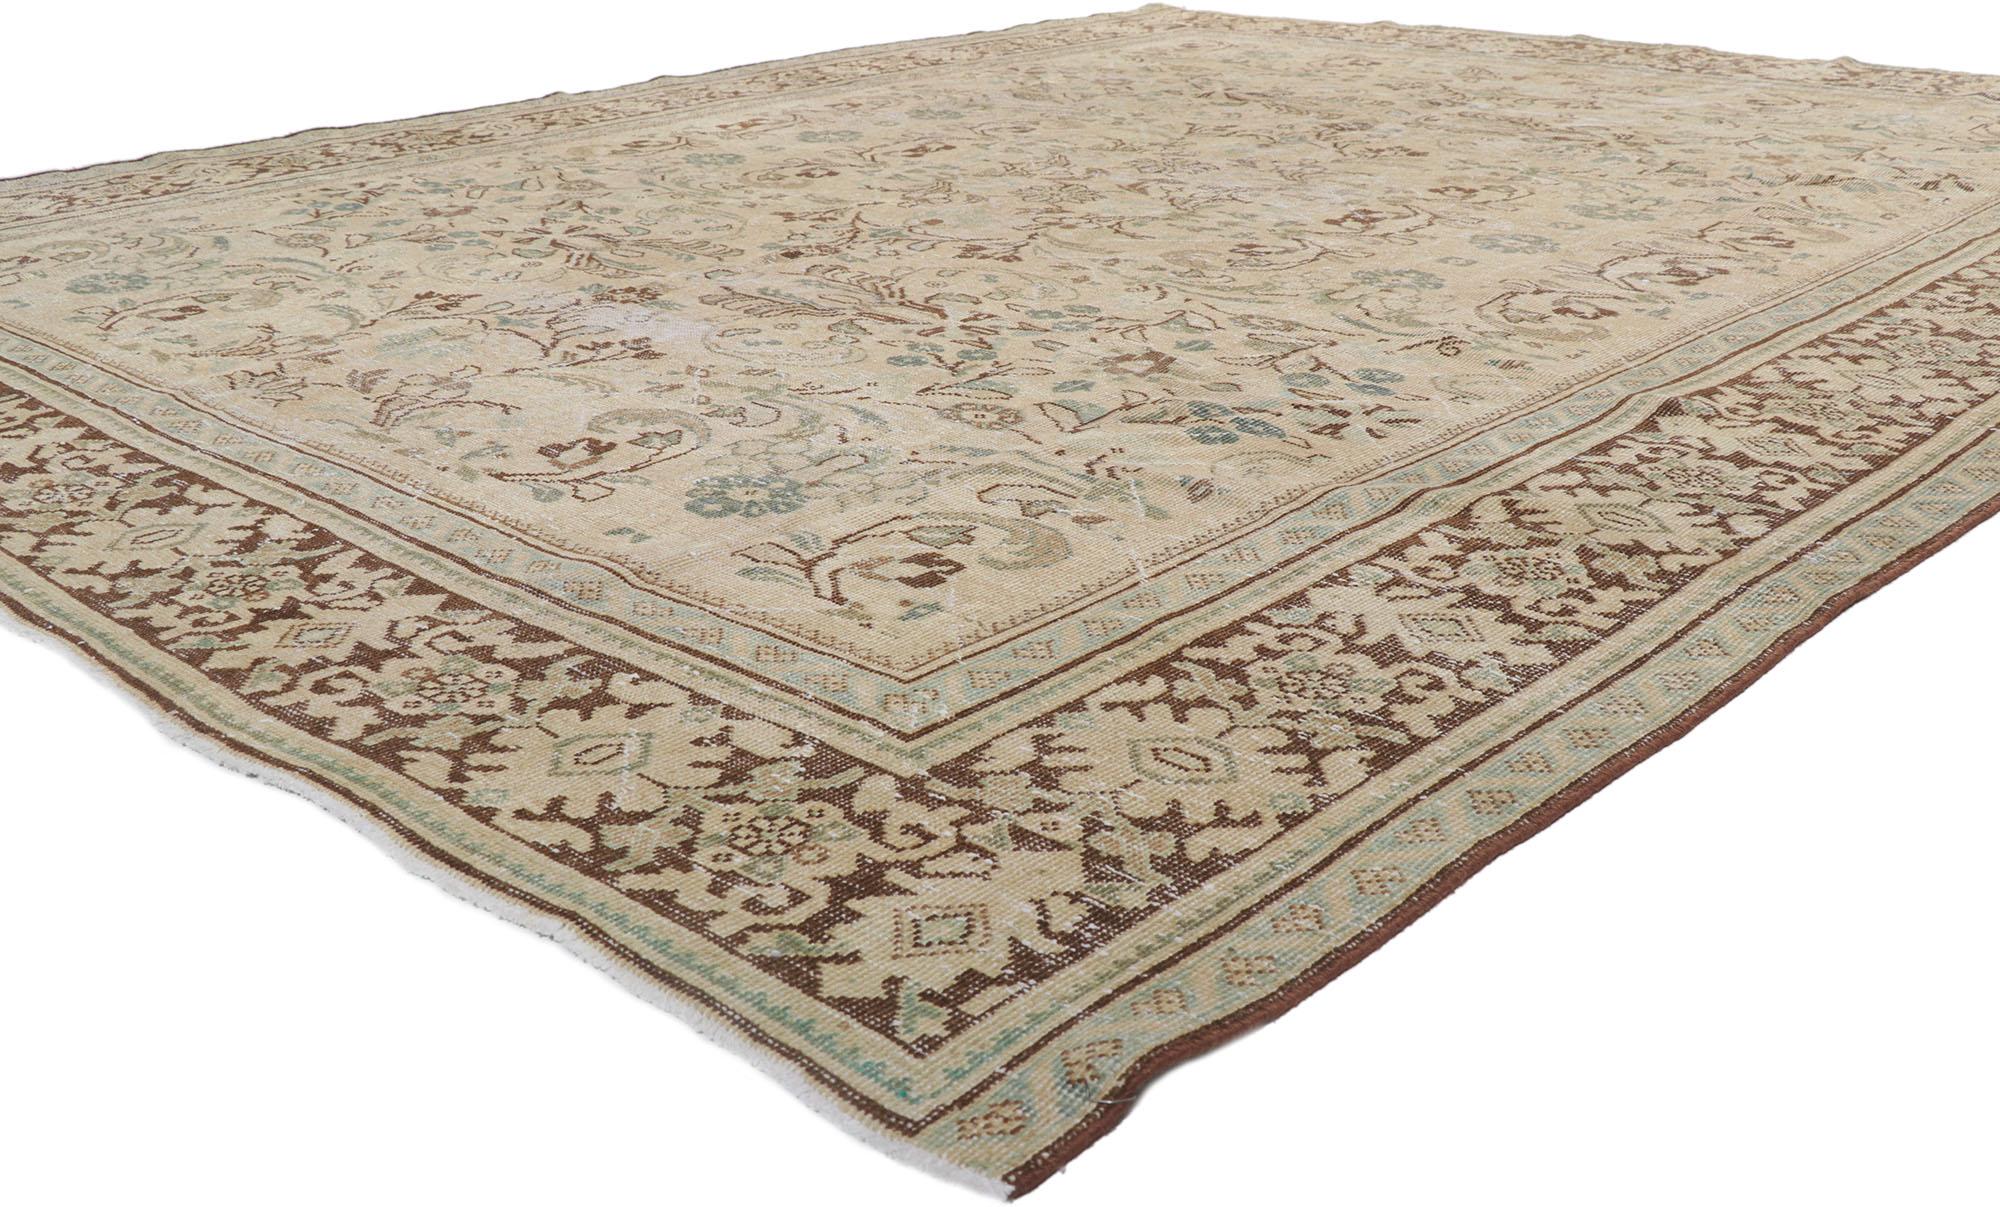 61028 Antique Persian Mahal Rug, 09'05 x 12'02.
Distressed. Desirable Age Wear. Antique Wash. Abrash. Hand-knotted wool. Made in Iran.